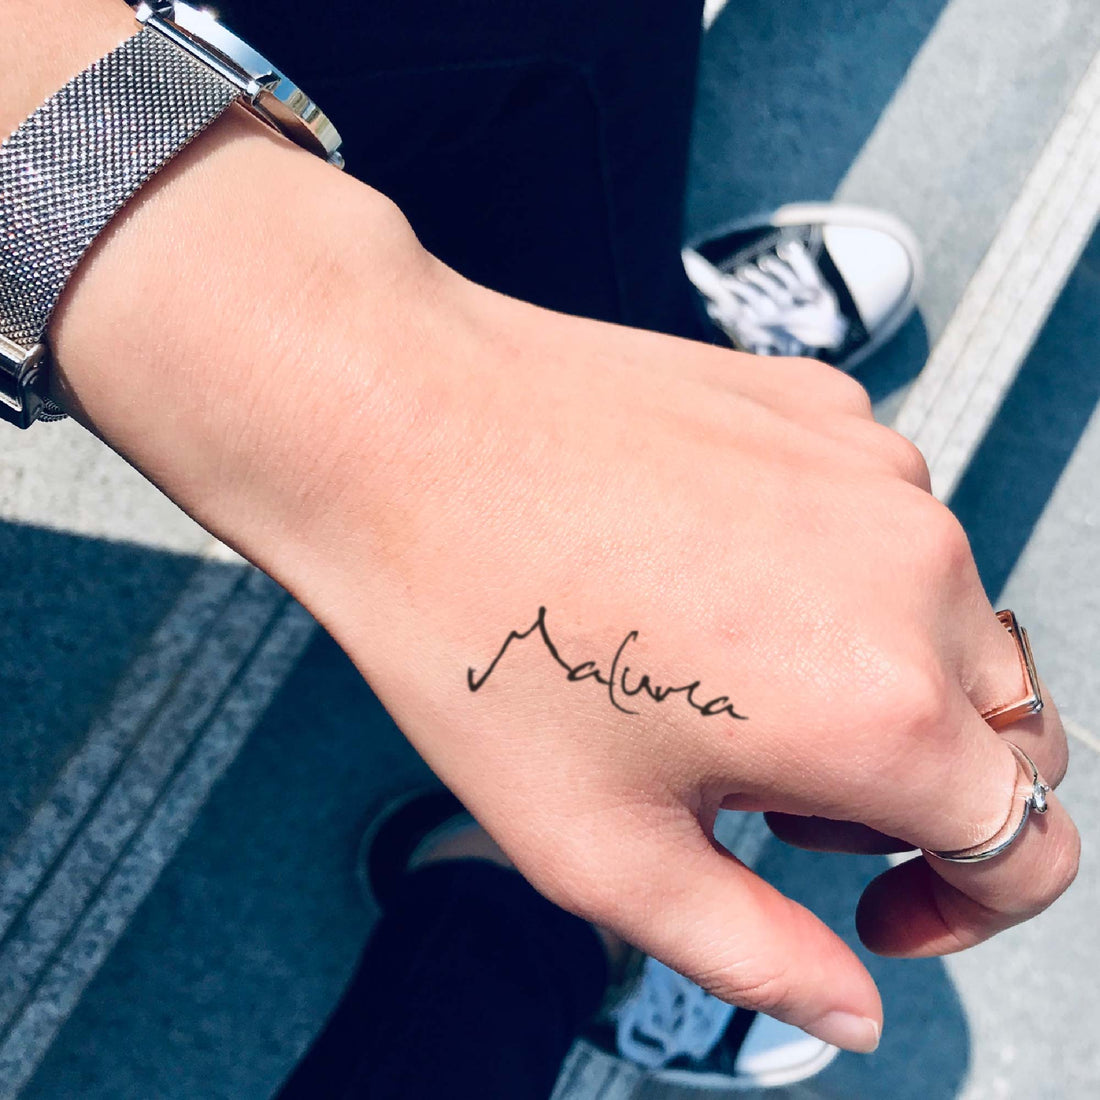 Maluma custom temporary tattoo sticker design idea inspiration meanings removal arm wrist hand words font name signature calligraphy lyrics tour concert outfits merch accessory gift souvenir costumes wear dress up code